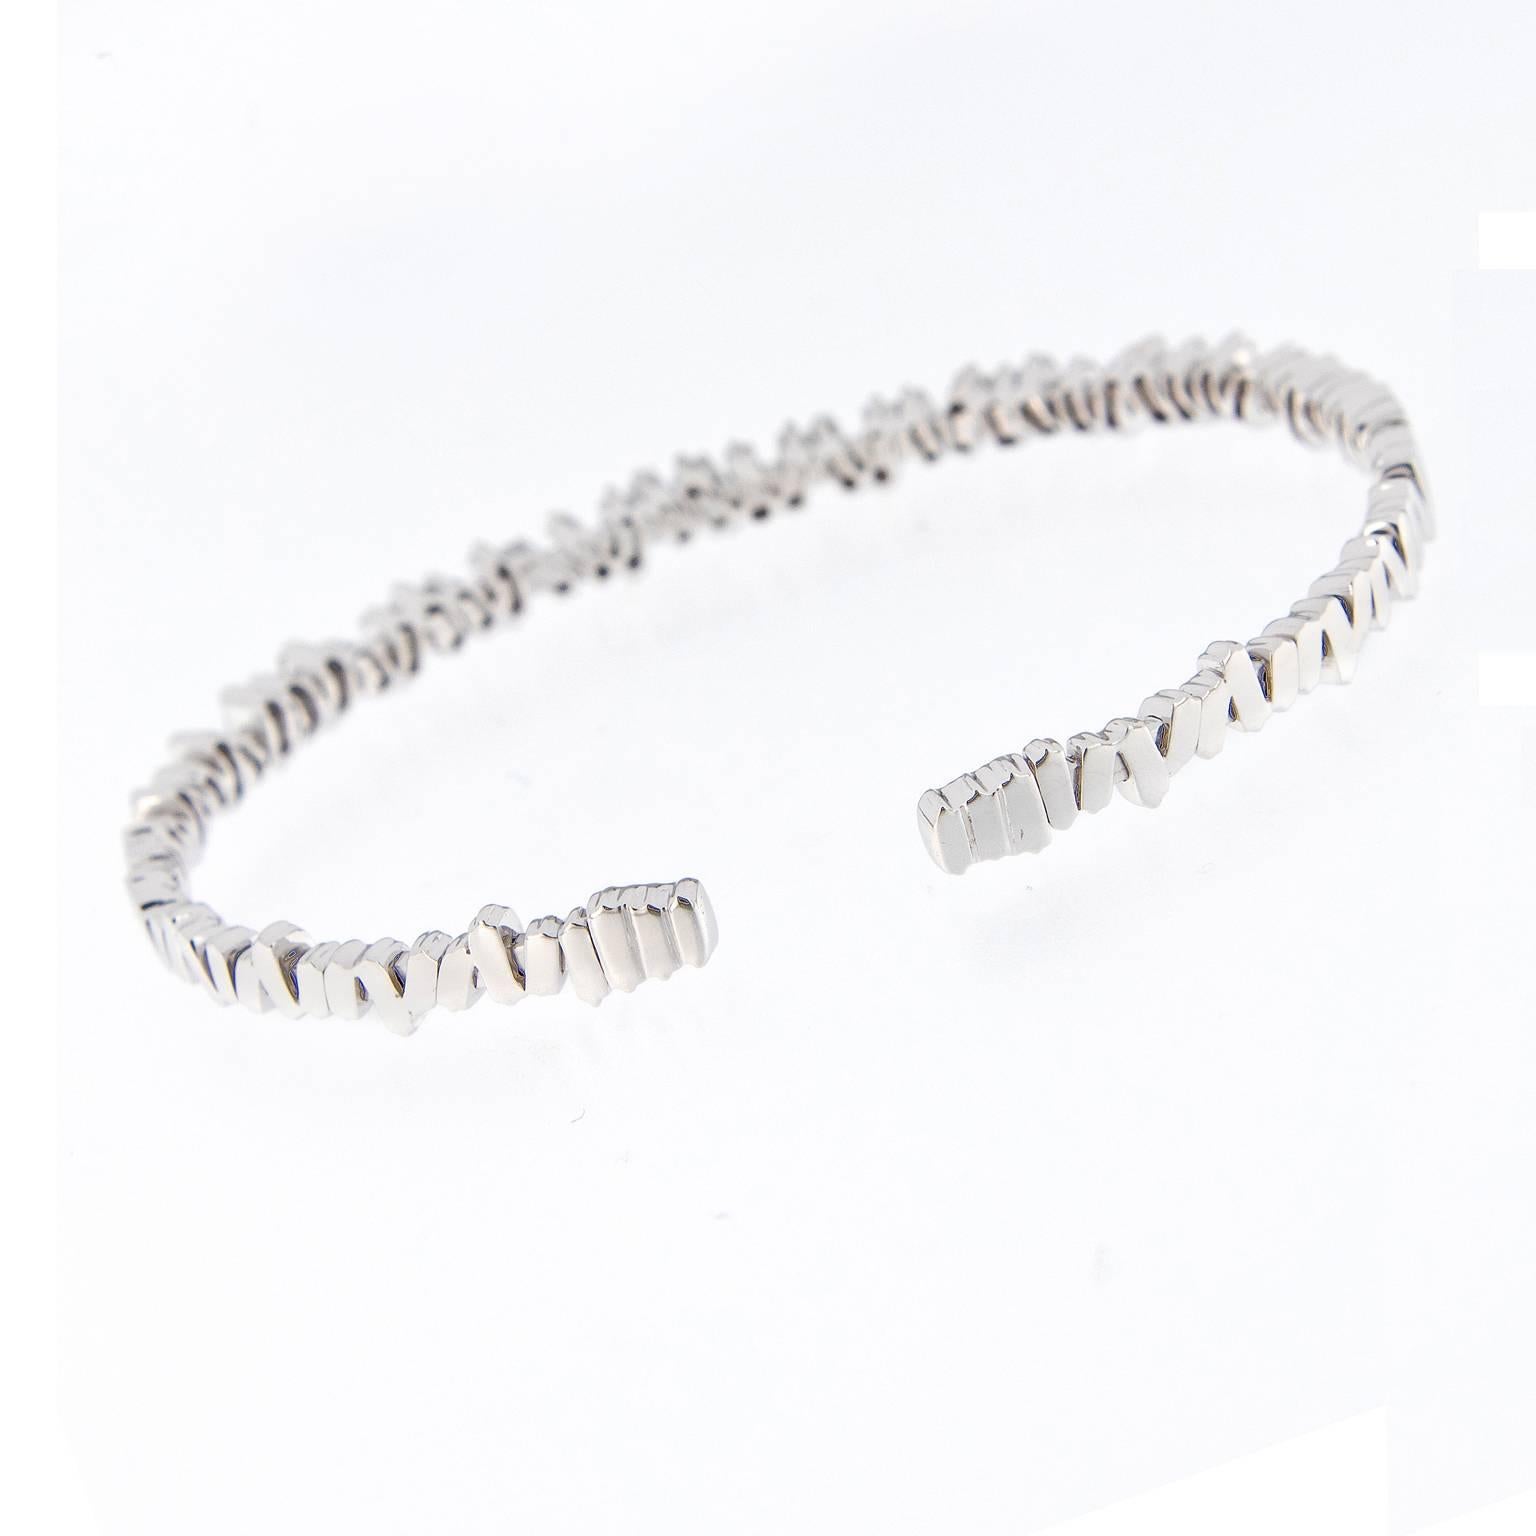 Suzanne Kalan says the best thing about her designs is that they look just as good with jeans as they do with an evening dress. This stunning flexible cuff bracelet is expertly crafted in 18k white gold with baguette diamonds. Weighs 12.3 grams.